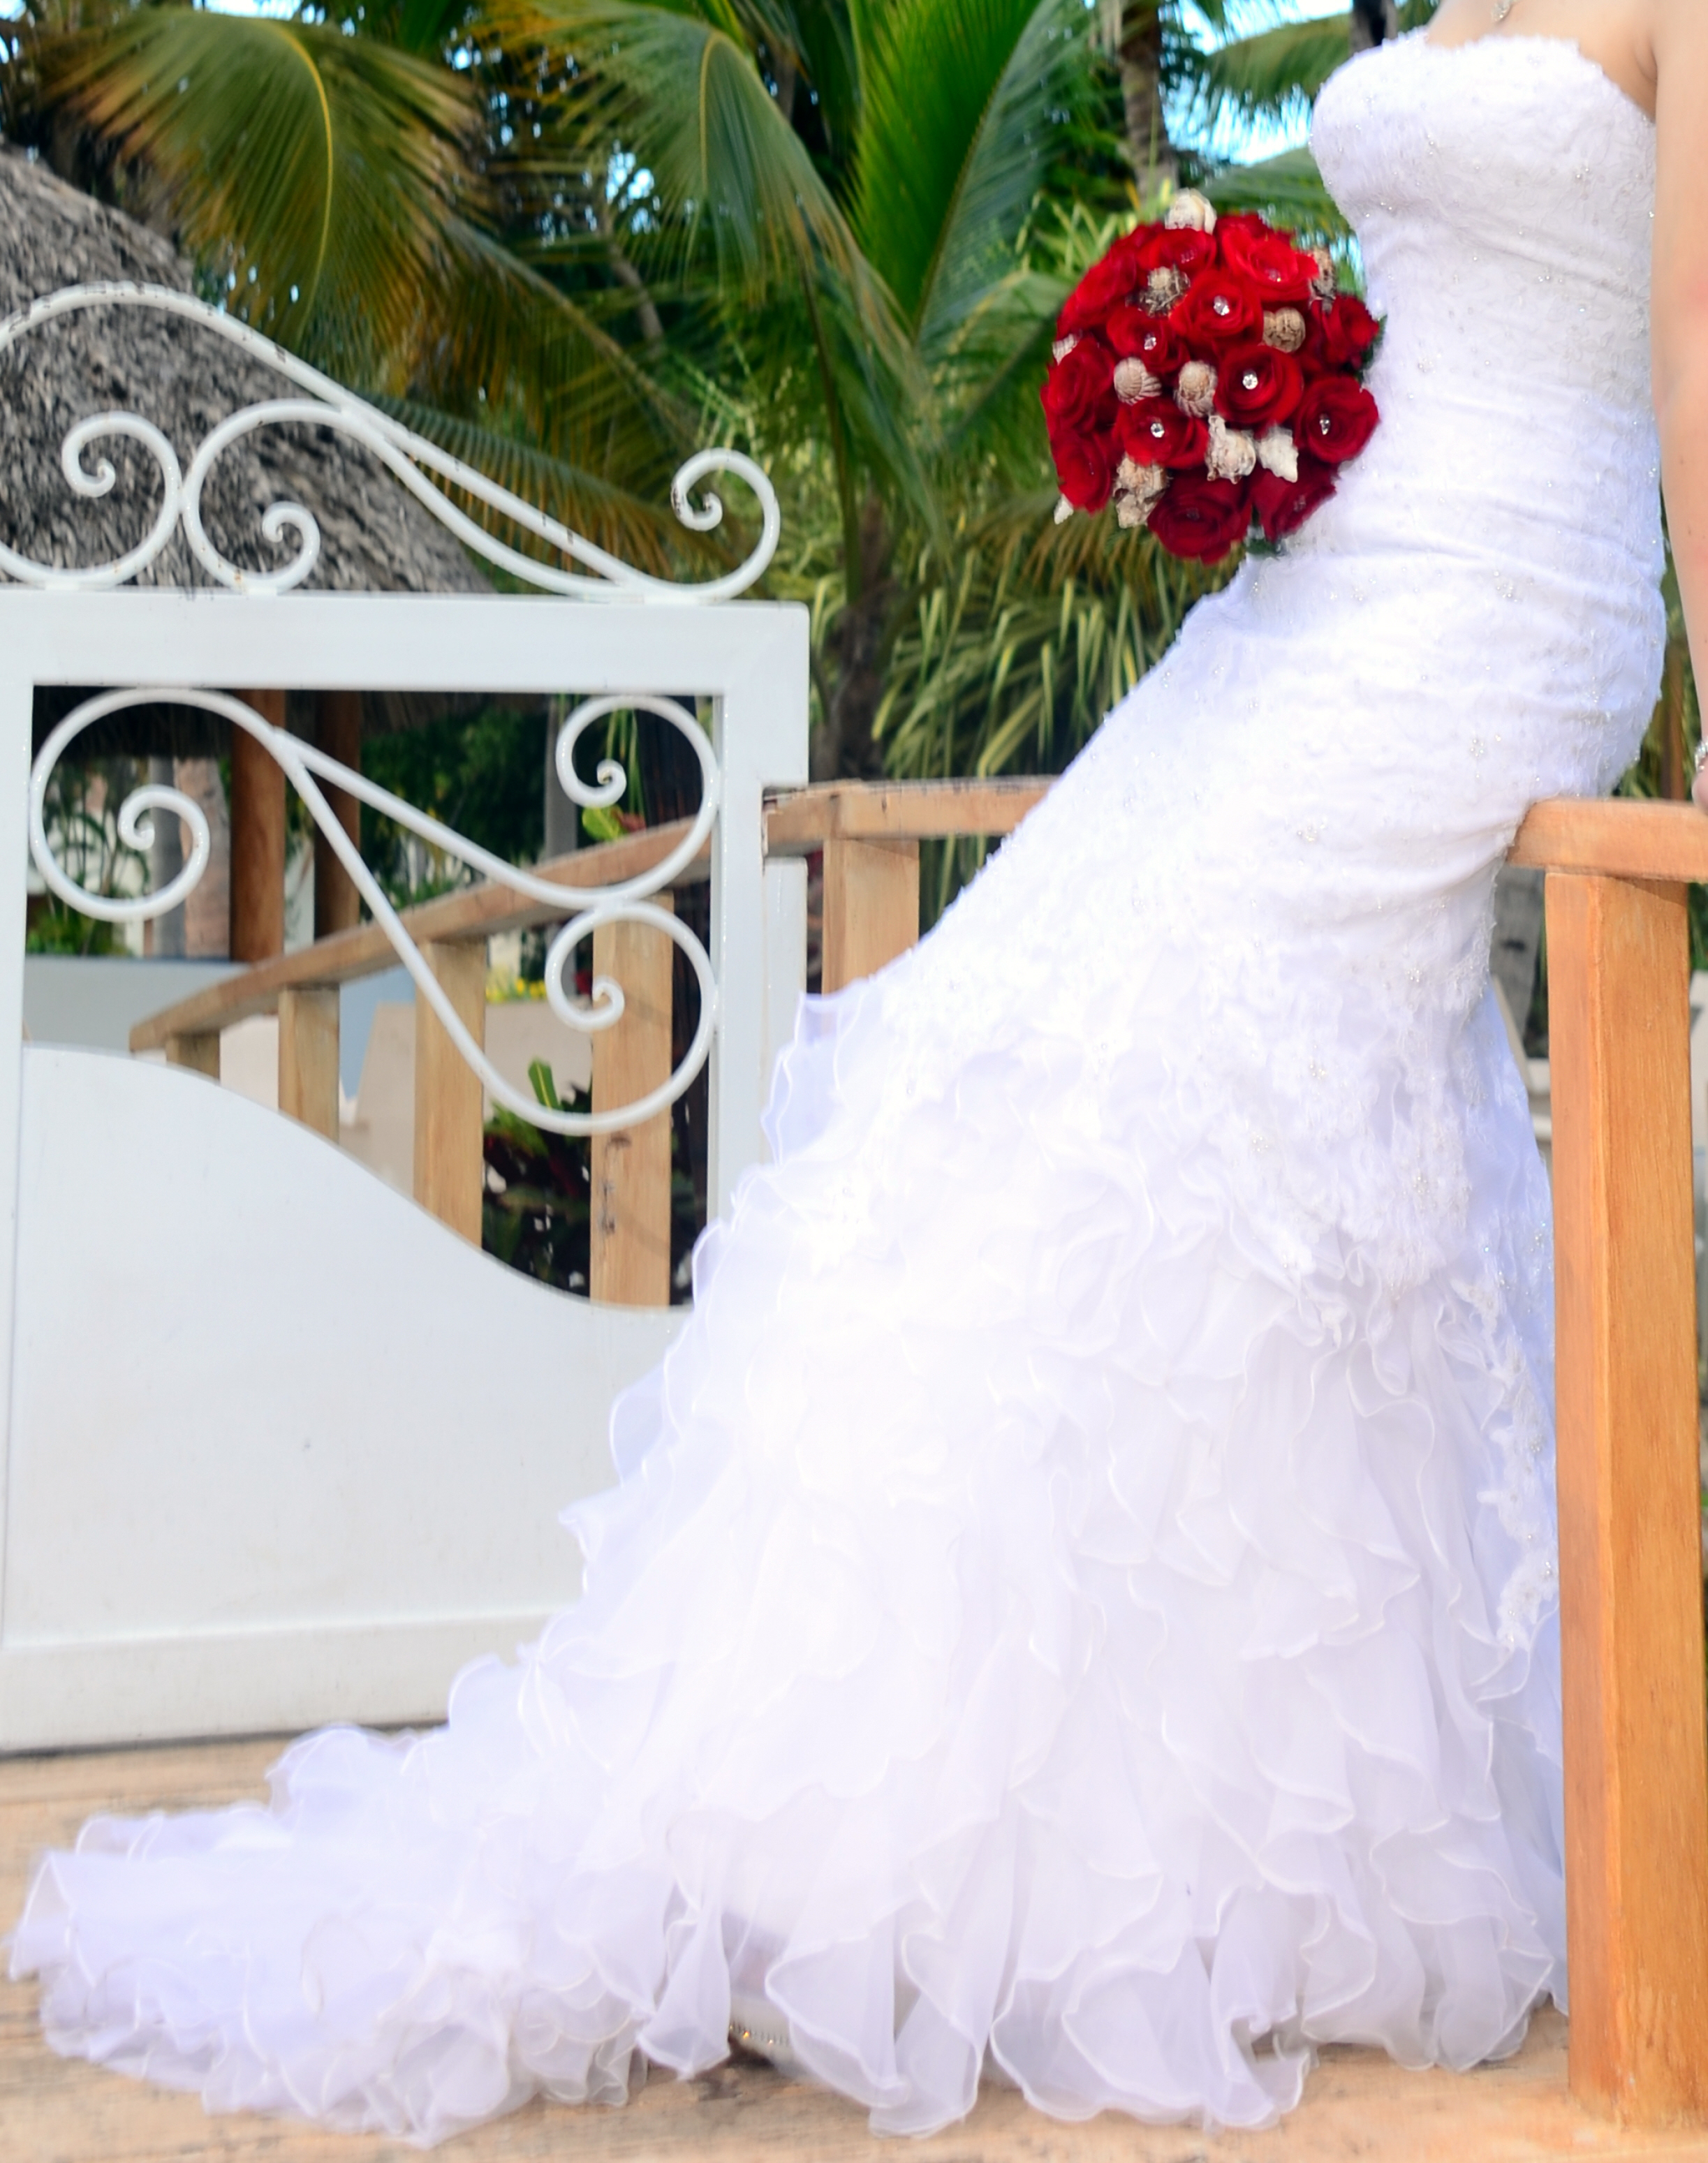 Bridal gown with red rose bouquet